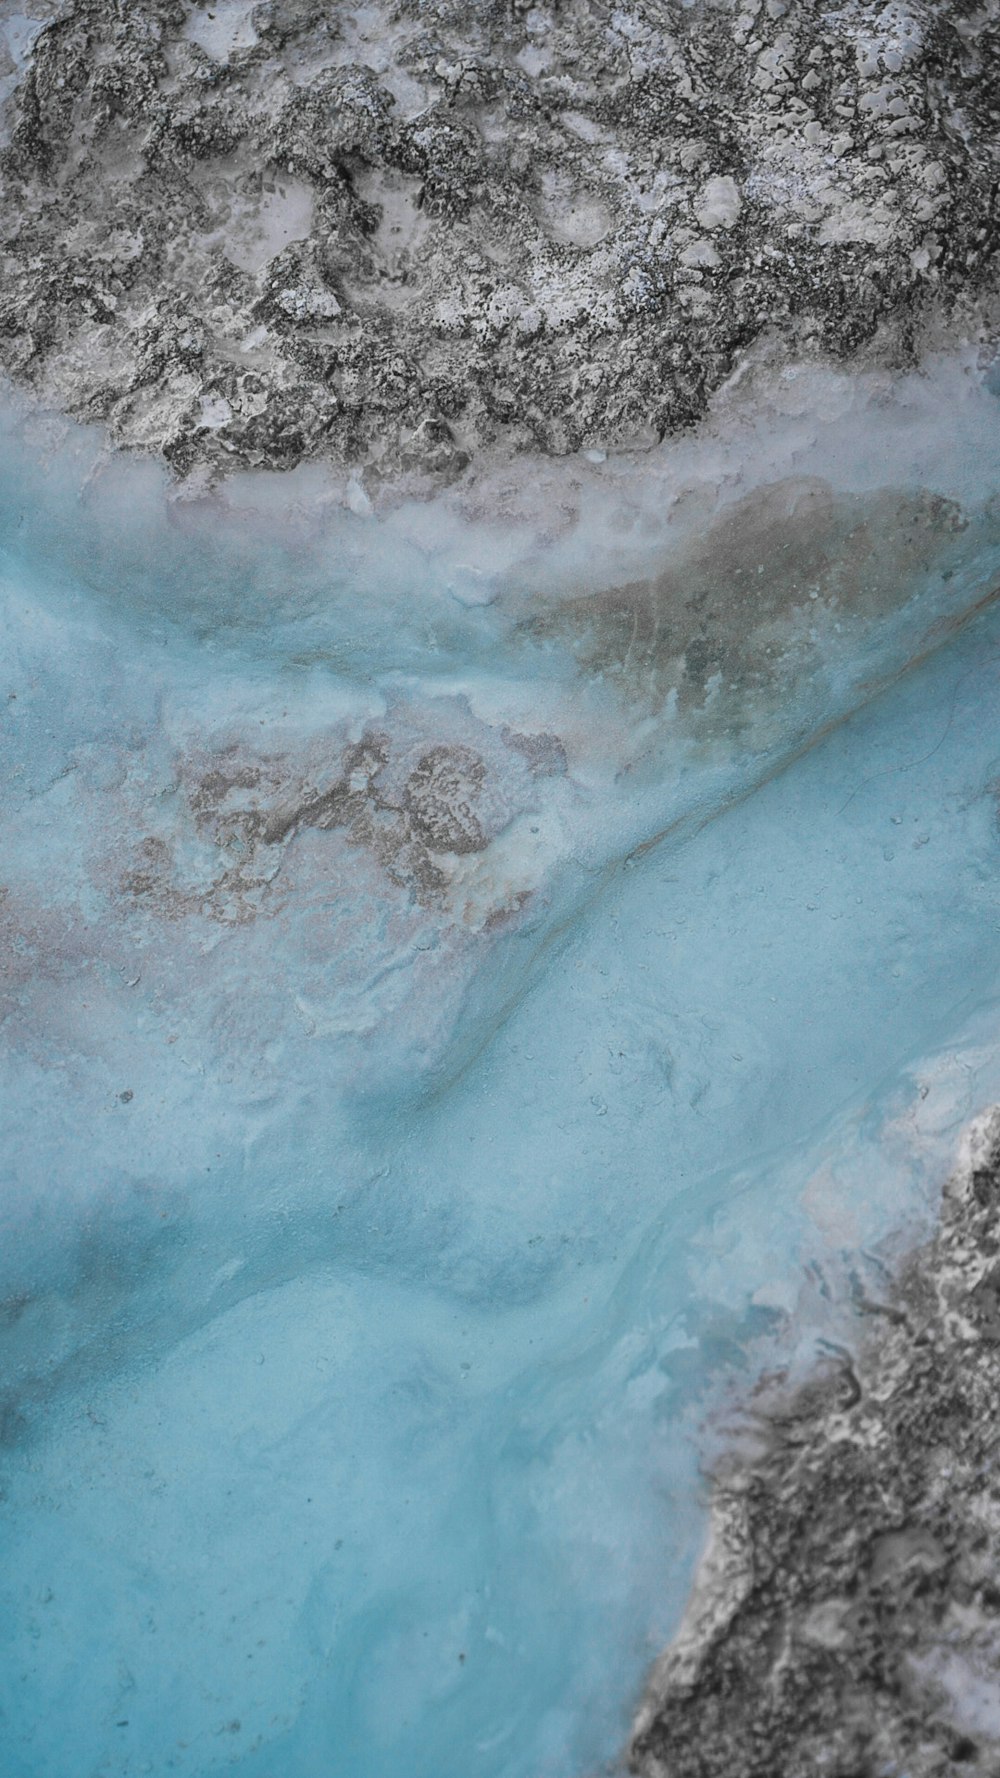 a close up of a blue substance in water